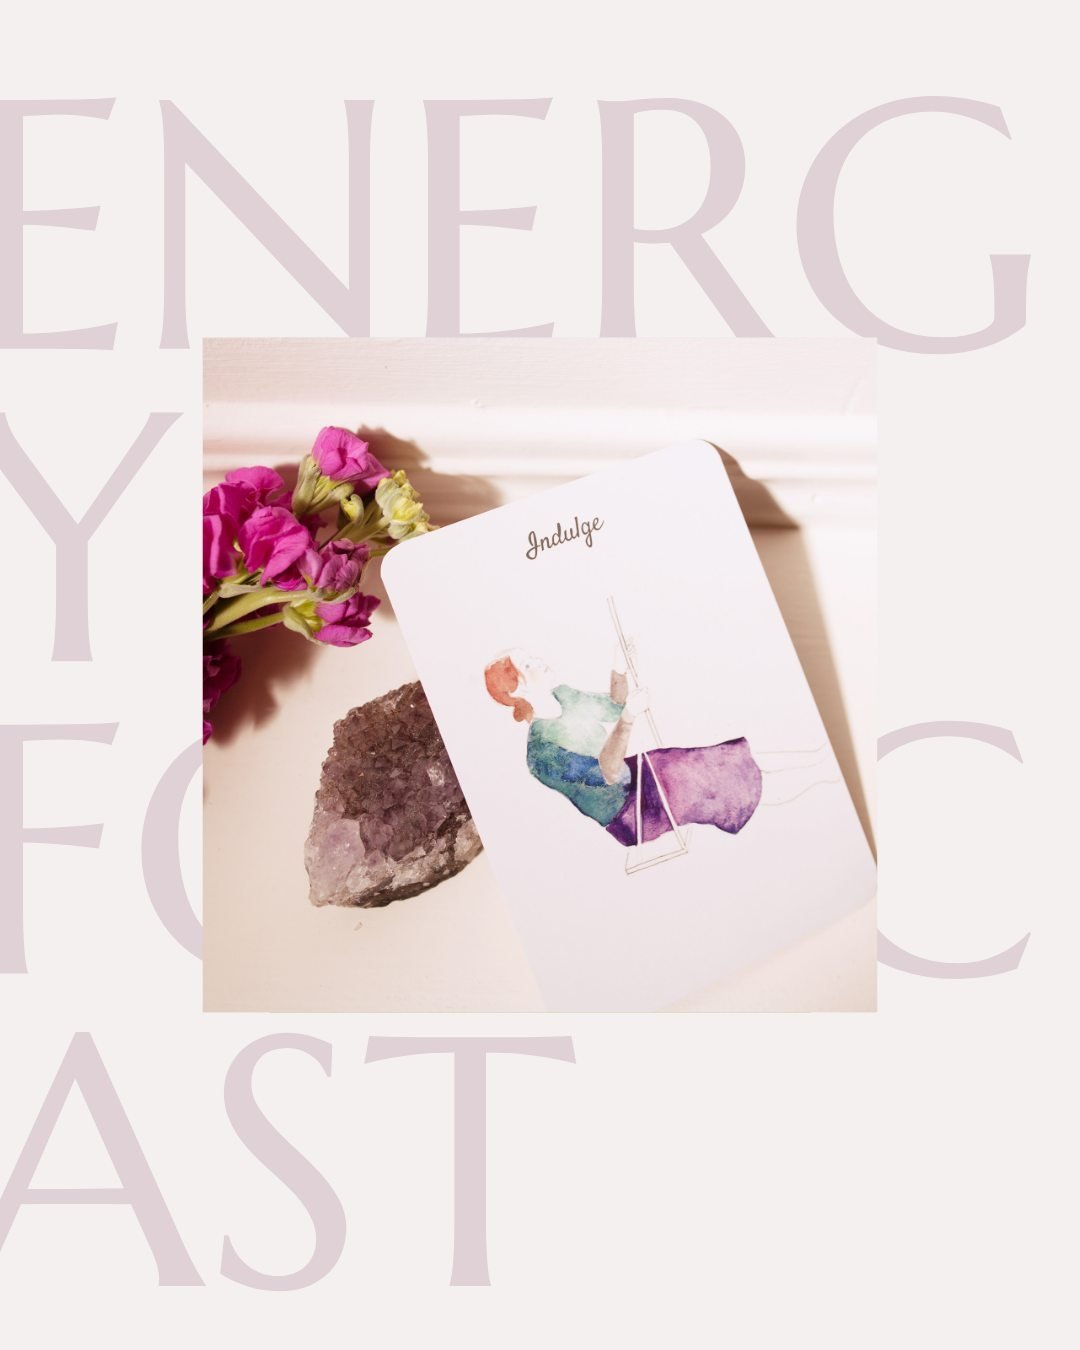 We're opening a four-month energy cycle as we enter May... its all about indulgence and pleasure. ⁠
⁠
With this energy we are reminded:⁠
⁠
🌹 not to over-indulge in ways that aren't truly loving ⁠
🌹 not to under-indulge in ways that are truly loving